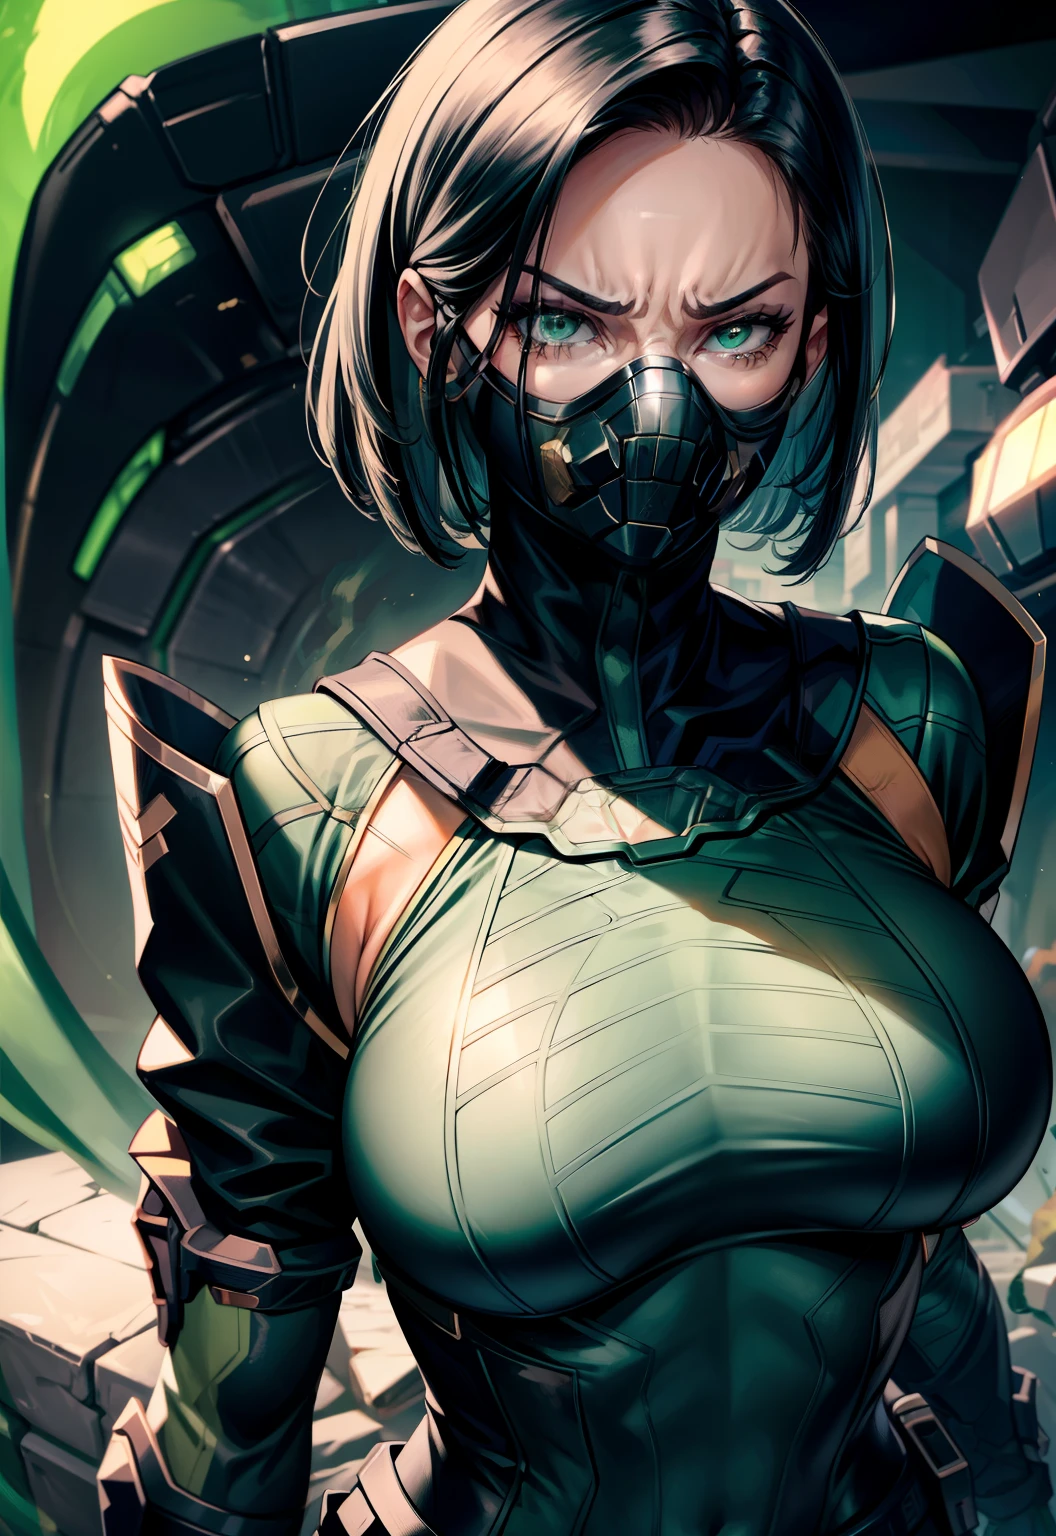 Masterpiece, Best quality,Look at the woman from below ，《Fearless viper》, tightsuit, mitts, belt, thigh boots, respirator, view the viewer, face, Portrait, Close-up, Glowing eyes, green smoke, Black background,huge tit，Raised chest，Close-up of chest，oversized ，chest focus，Woman in a swimsuit，angry look，Extremely erotic figure，Staring angrily at the screen，Facing the screen